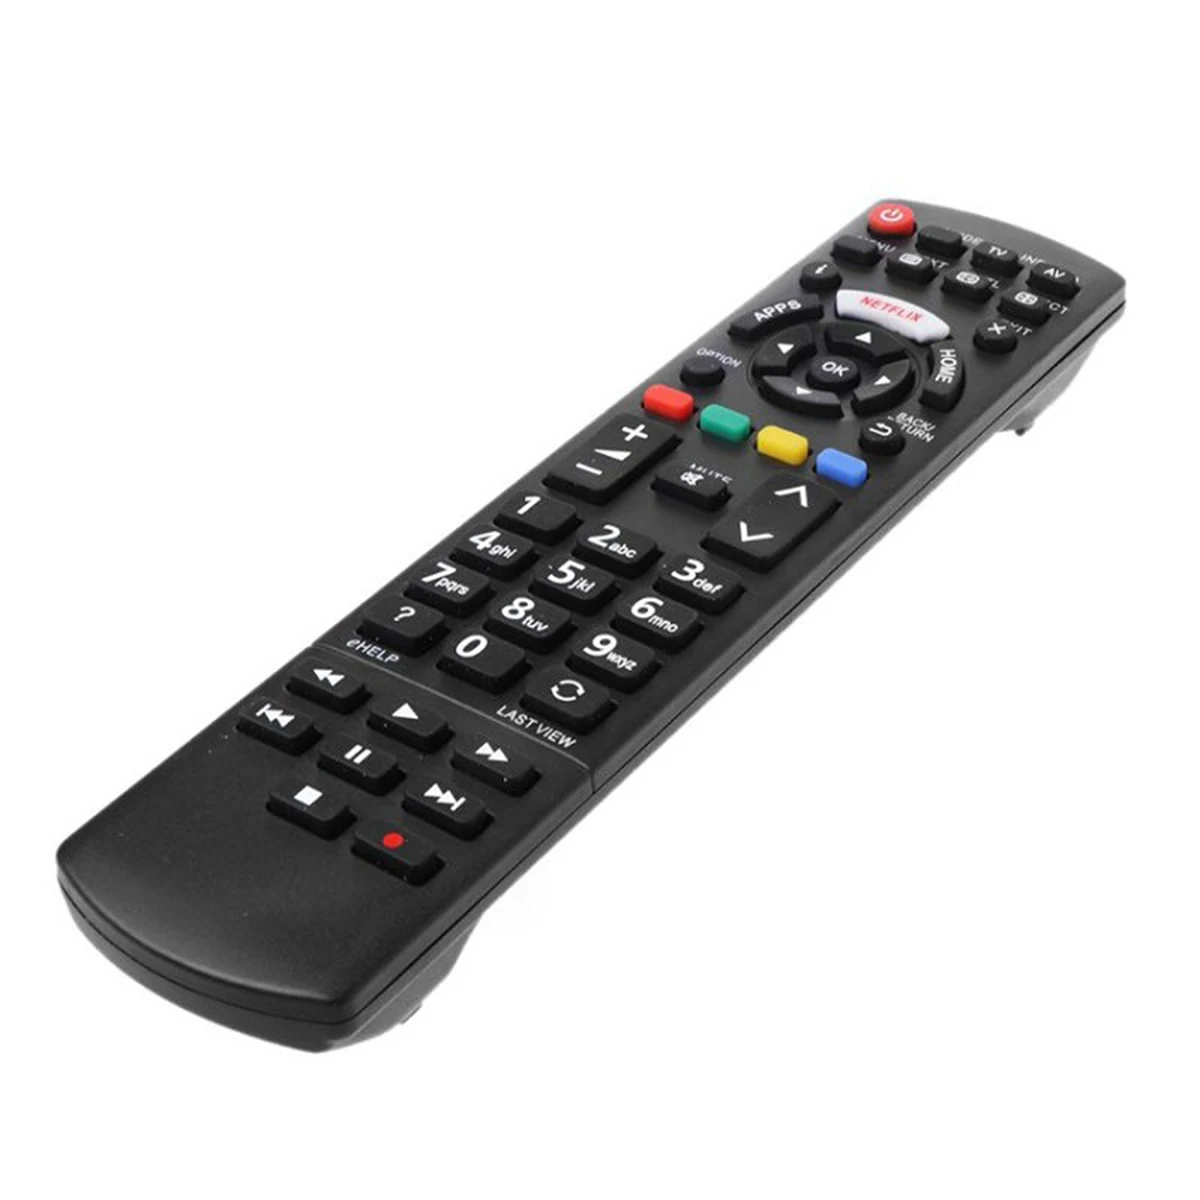 Tv remote control For Pana Sonic Tv With Netflix N2QAYB001008 LED